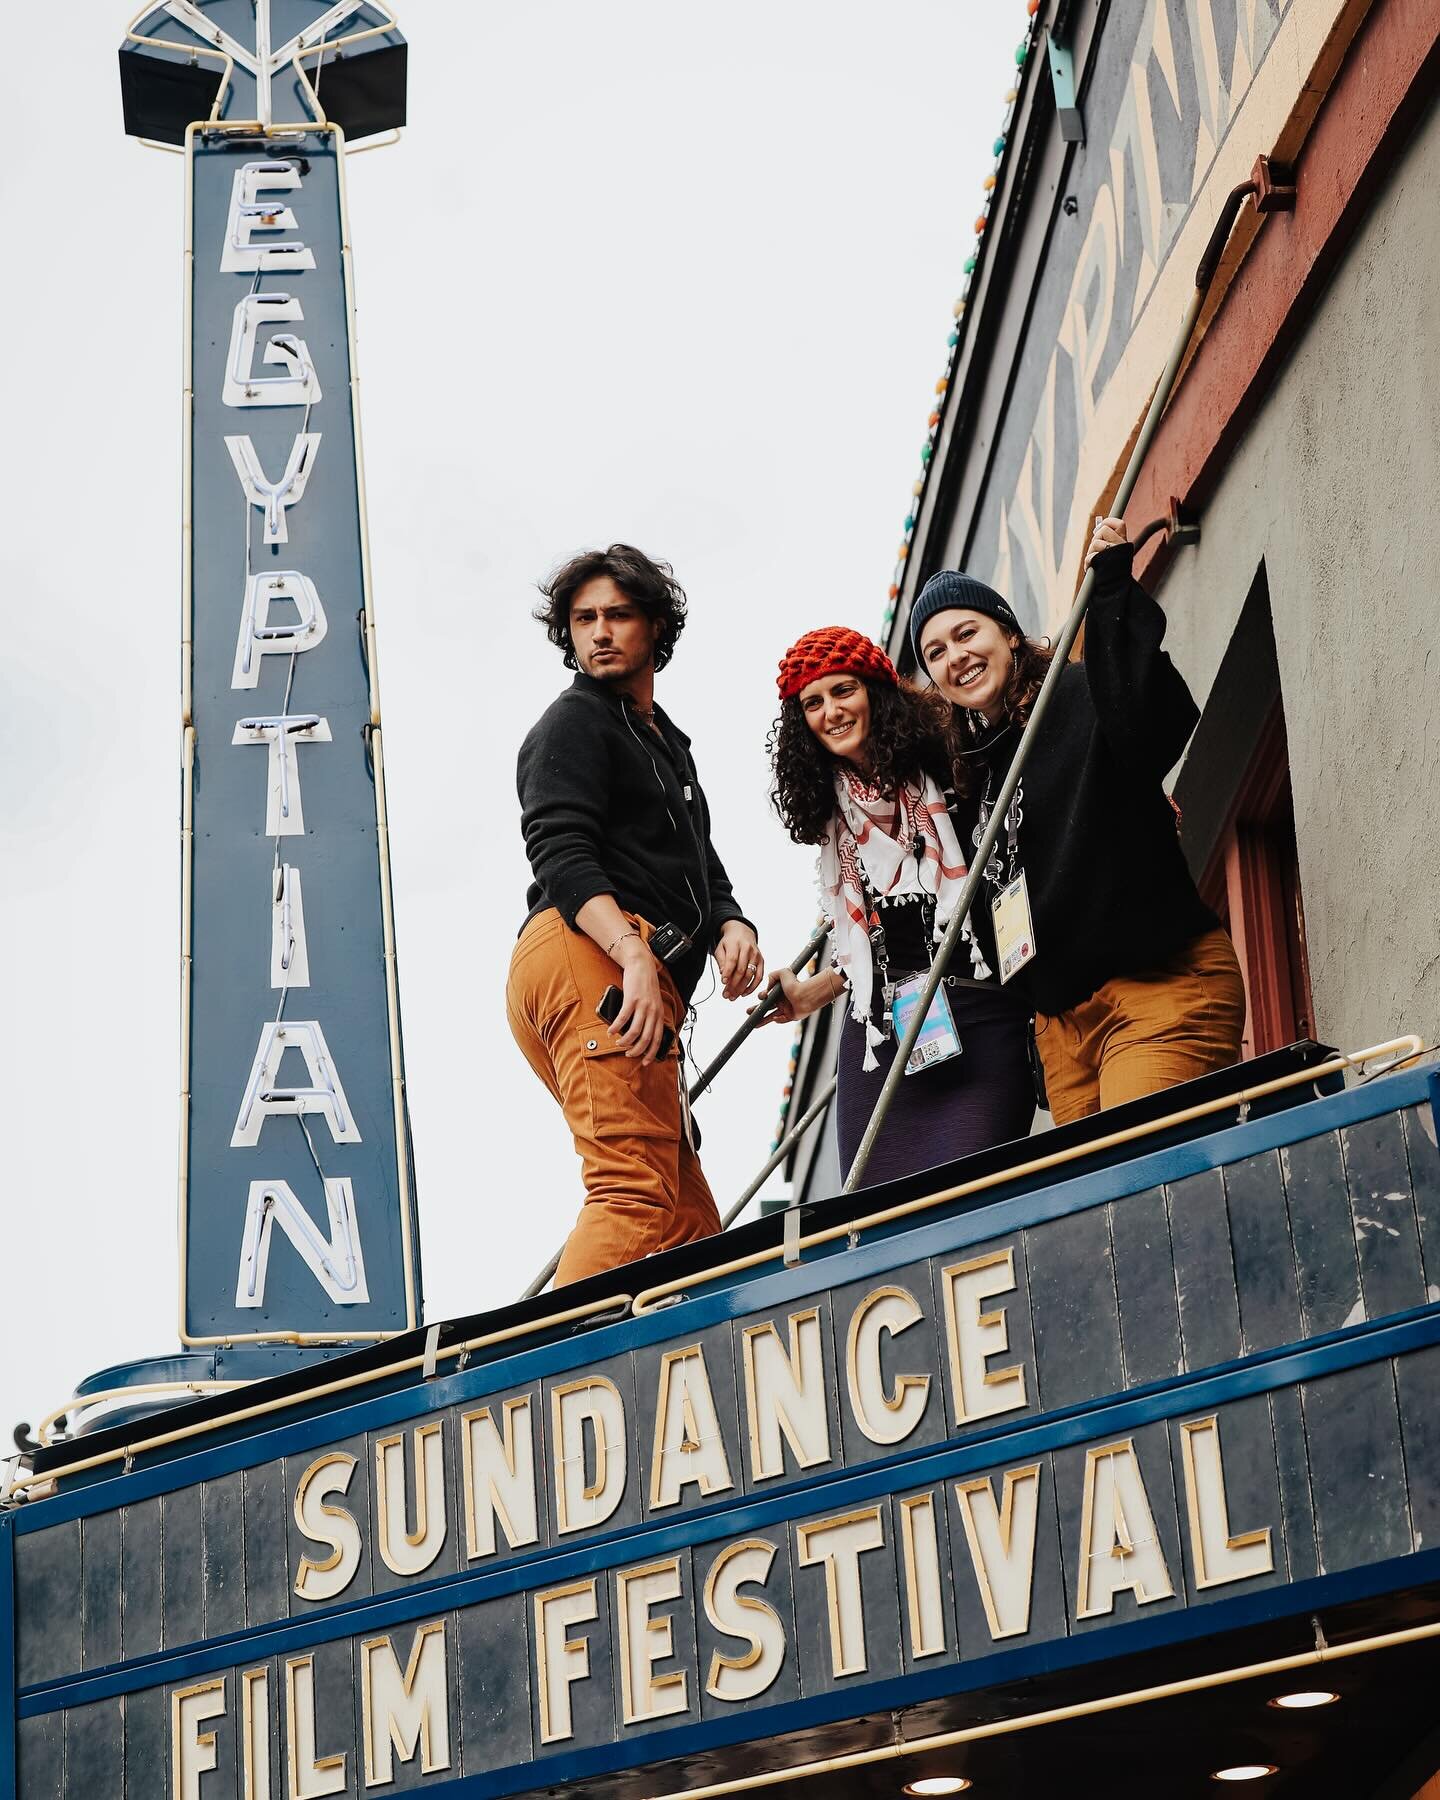 SUNDANCE RECAP (2/2)

Jason Schwartzman and Carol Kane - Between The Temples (2024)
Jodie Foster and Alexandra Hedison - Alok (2024)
Saoirse Ronan - The Outrun (2024)
Angela Patton - Daughters (2024)
Justice Smith - I Saw The TV Glow (2024)
D&igrave;